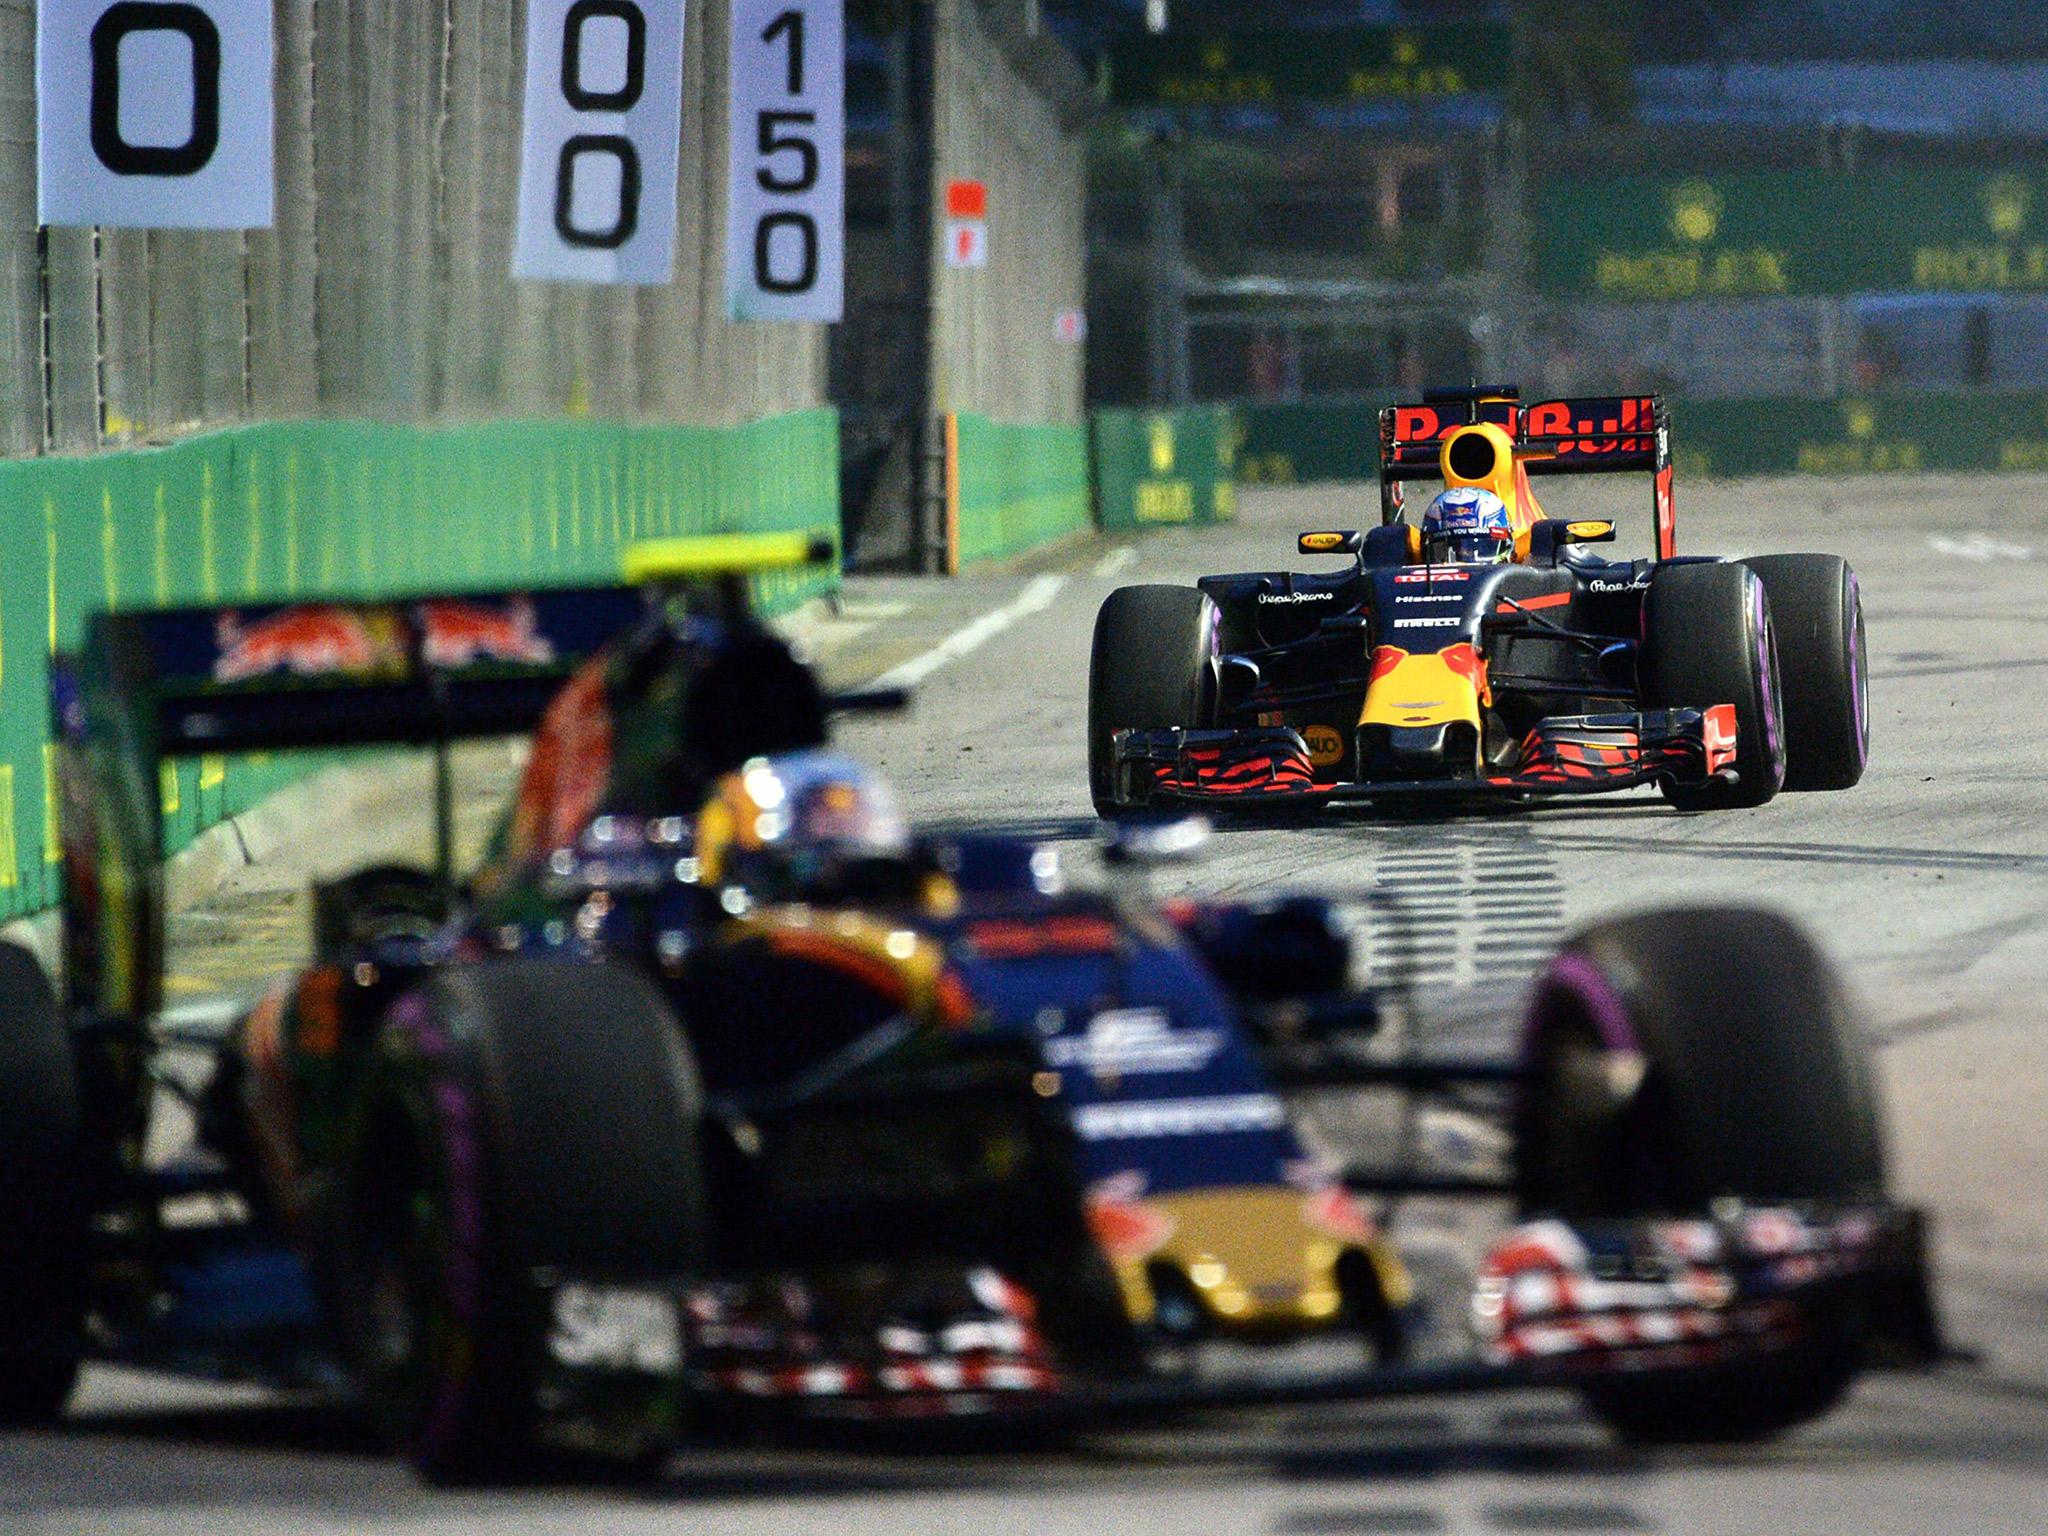 Daniel Ricciardo finished second behind Red Bull teammate Max Verstappen (not pictured)